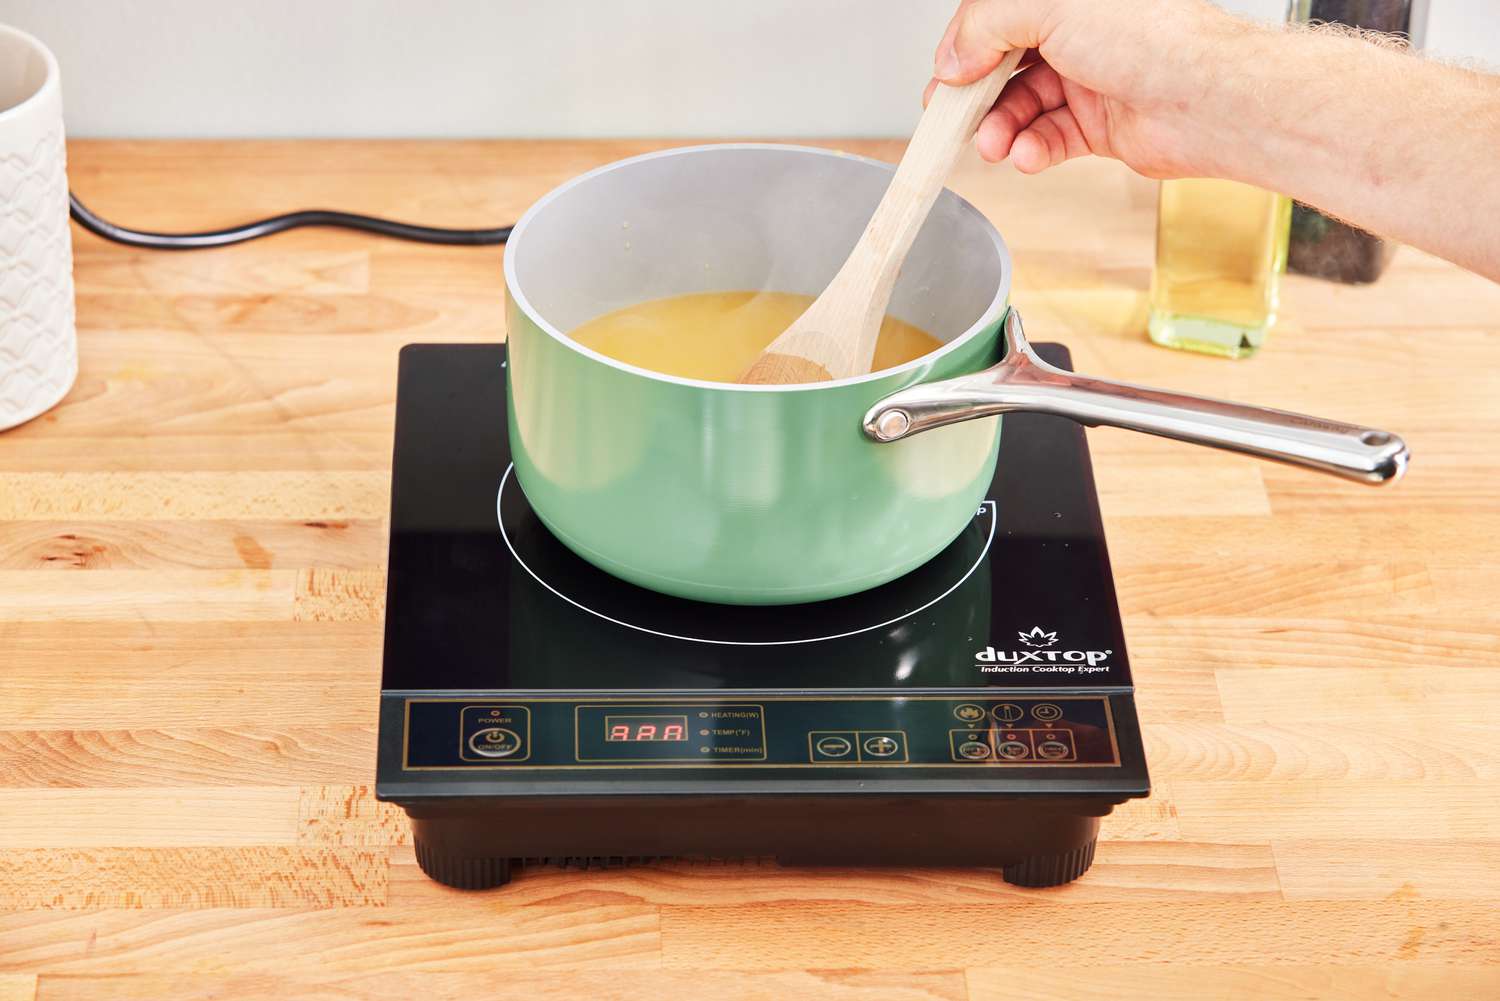 Hand stirring melted butter with wooden spoon in Caraway Cookware Set saucepan on hot plate